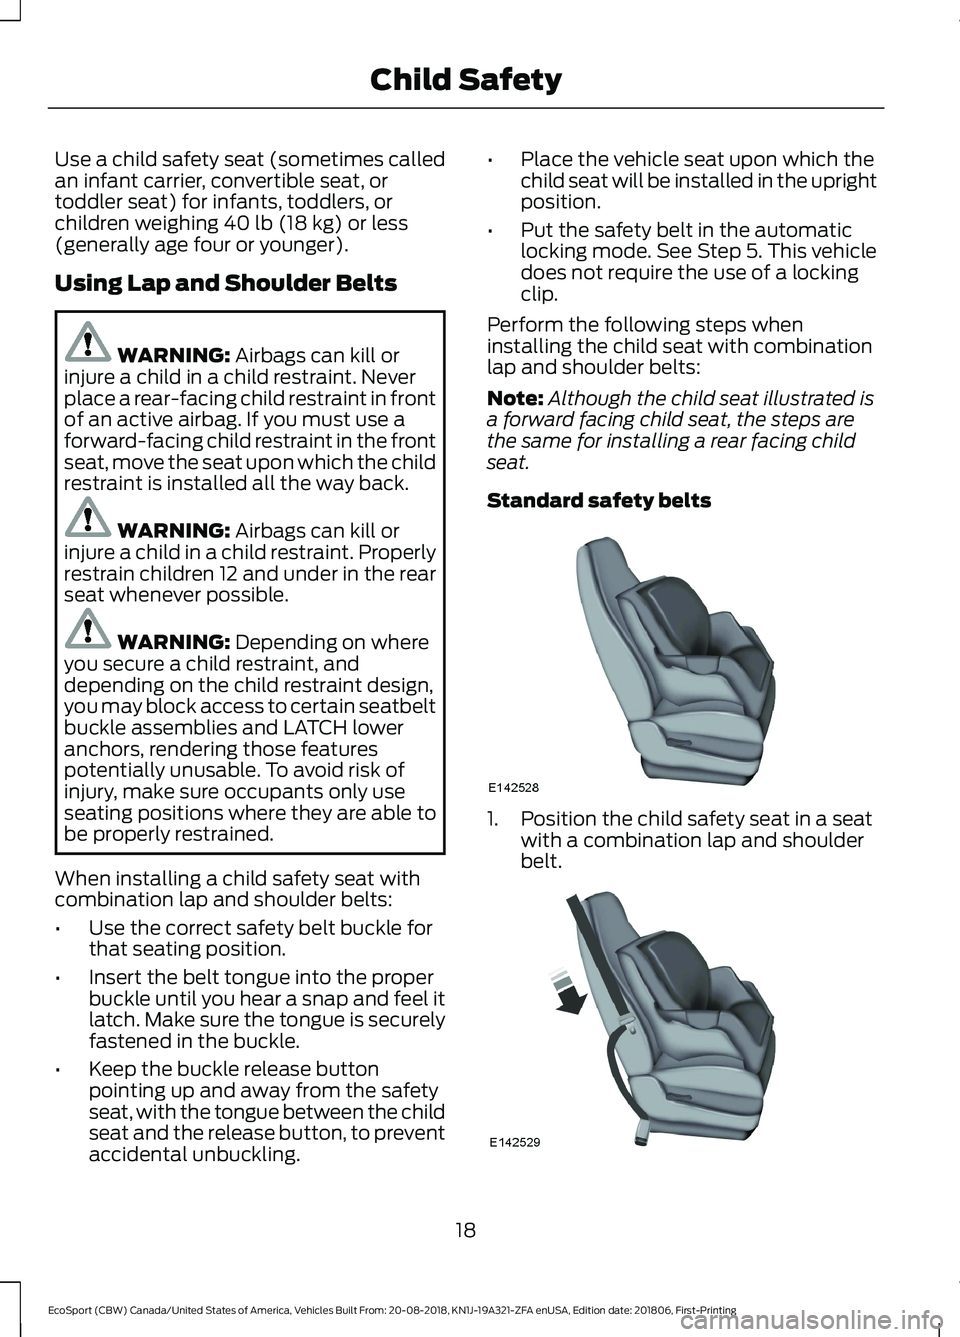 FORD ECOSPORT 2019  Owners Manual Use a child safety seat (sometimes calledan infant carrier, convertible seat, ortoddler seat) for infants, toddlers, orchildren weighing 40 lb (18 kg) or less(generally age four or younger).
Using Lap